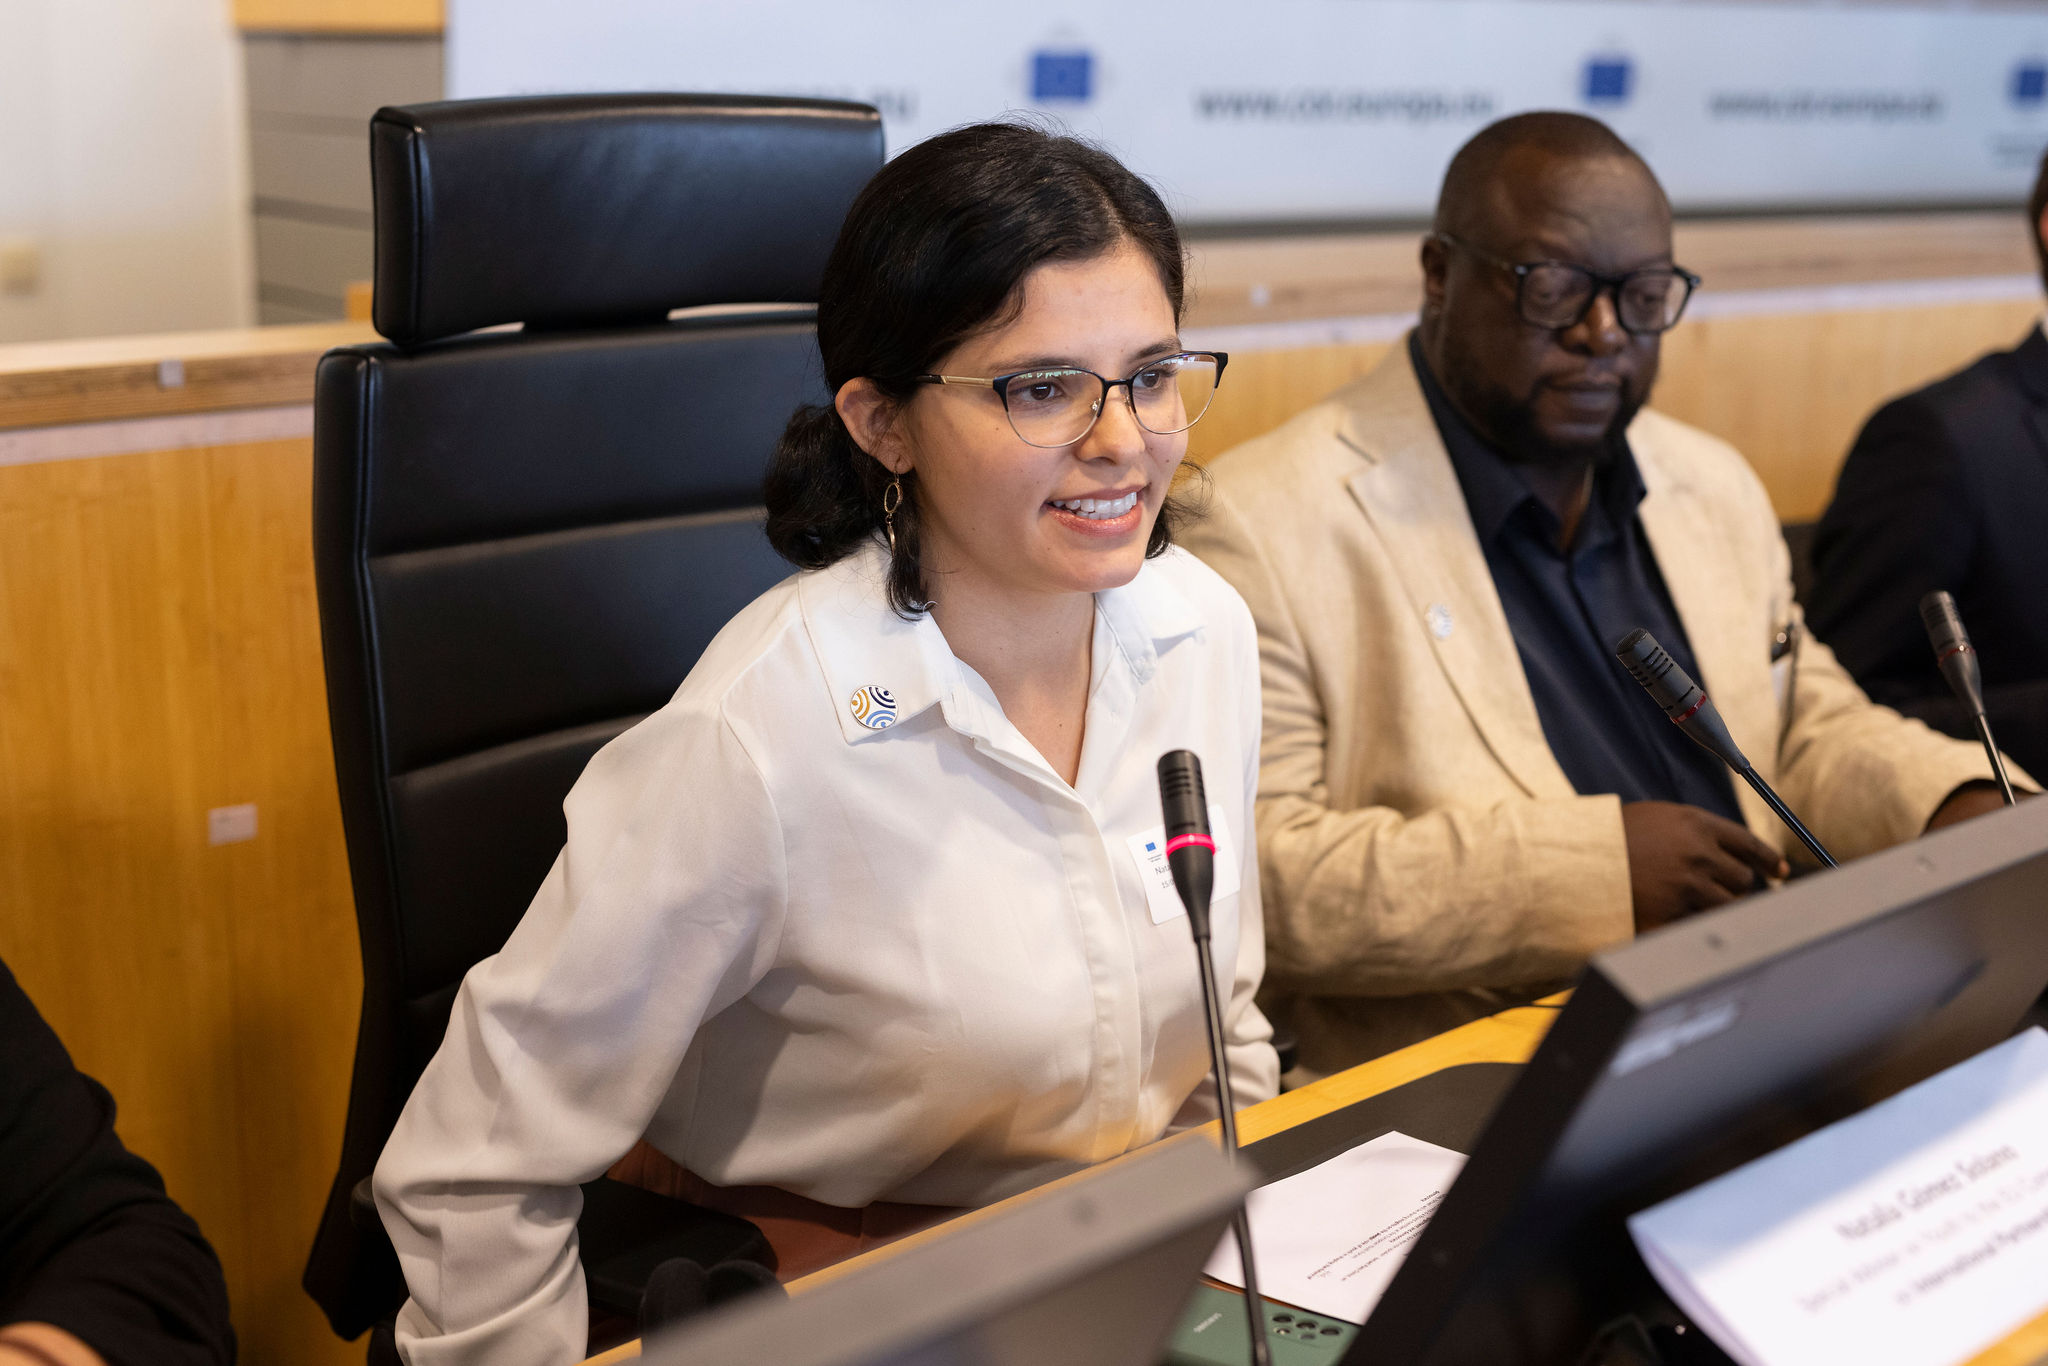 “Young people no longer want to hear that they are the future, because they are clearly the present. As democracy cannot be taken for granted, strengthening the civic space, including for youth, is necessary. It matters for people’s quality of life.” Natalia Gómez Solano, Special Adviser on Youth to the EU.